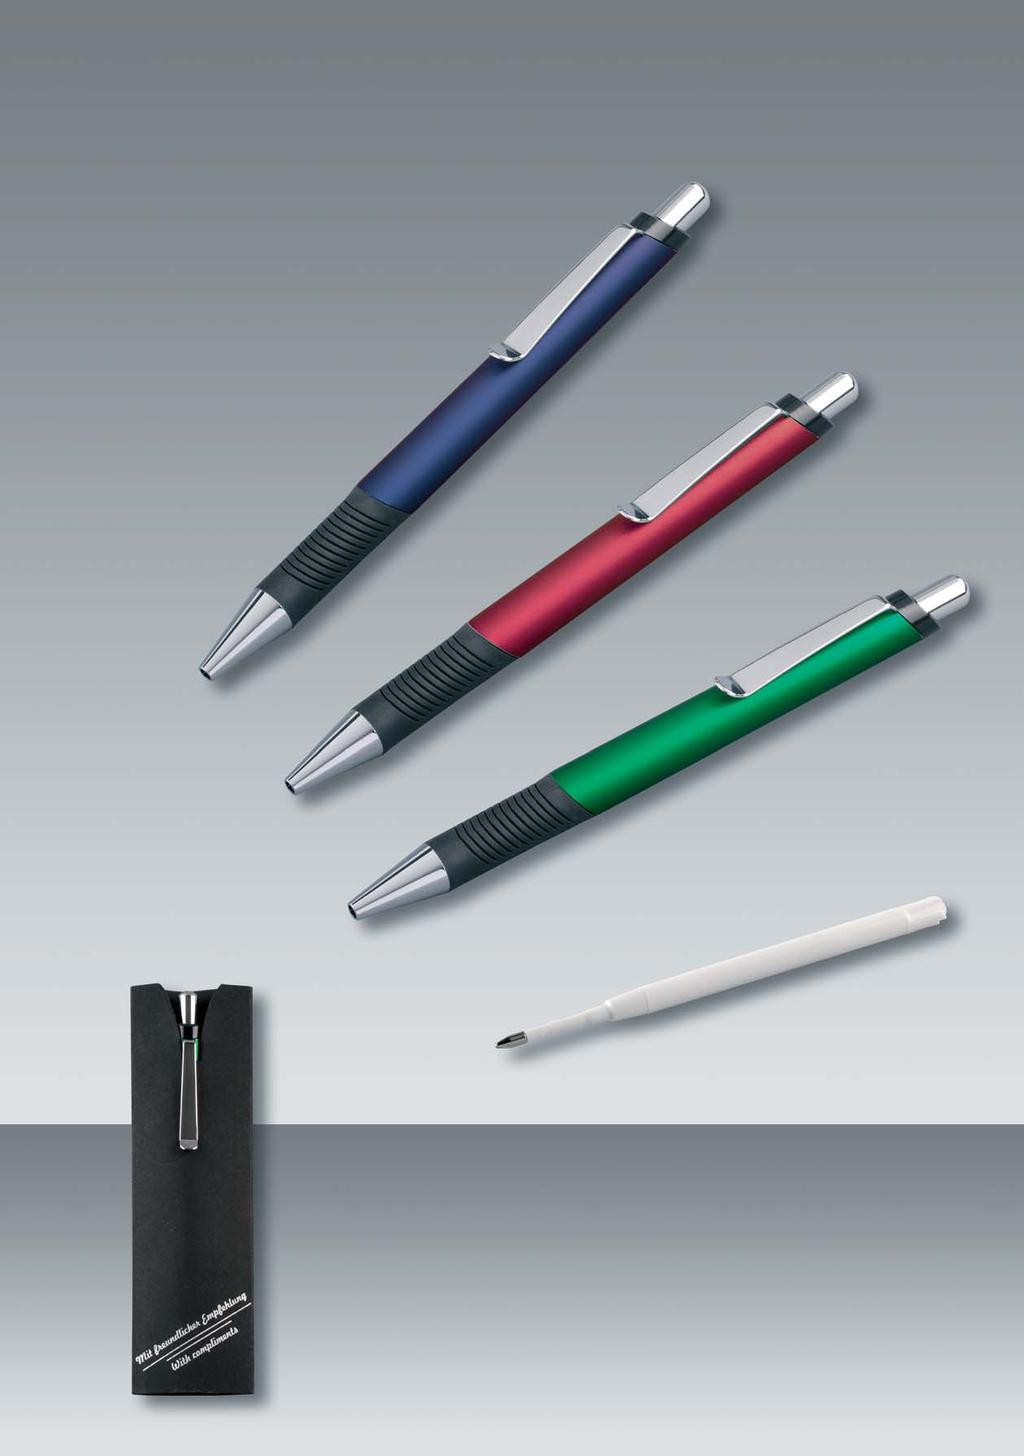 Article 270/KS: alu ball pen with body in blue, red or green, rubber grip in black, plastic